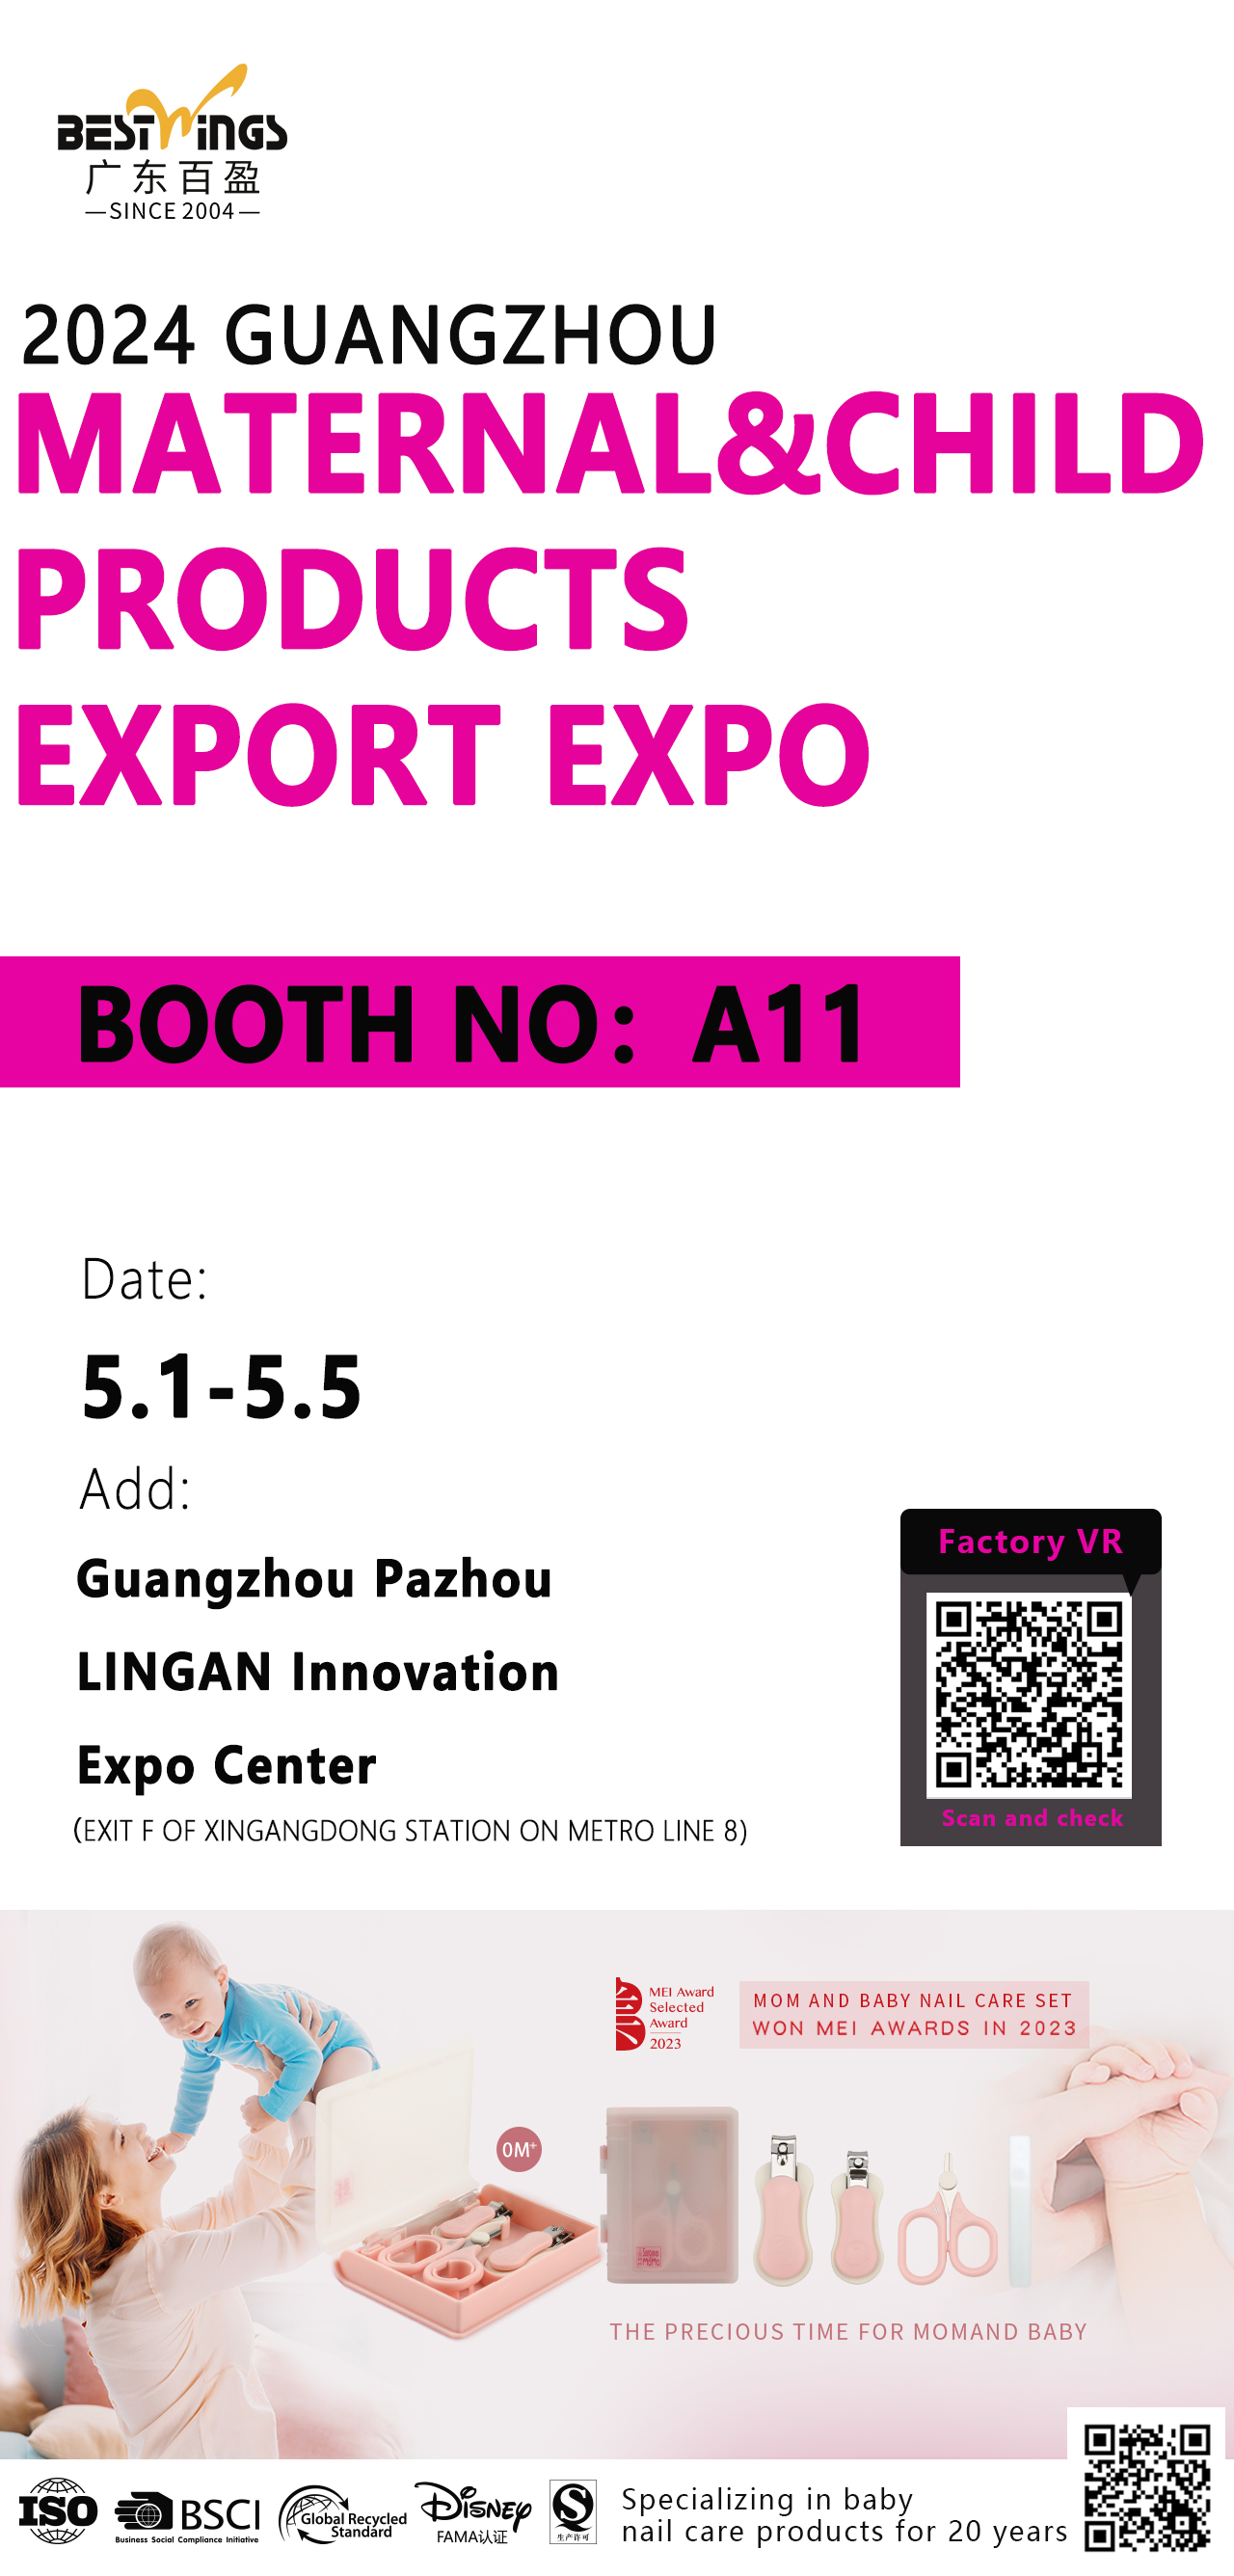 maternal&child products export expo